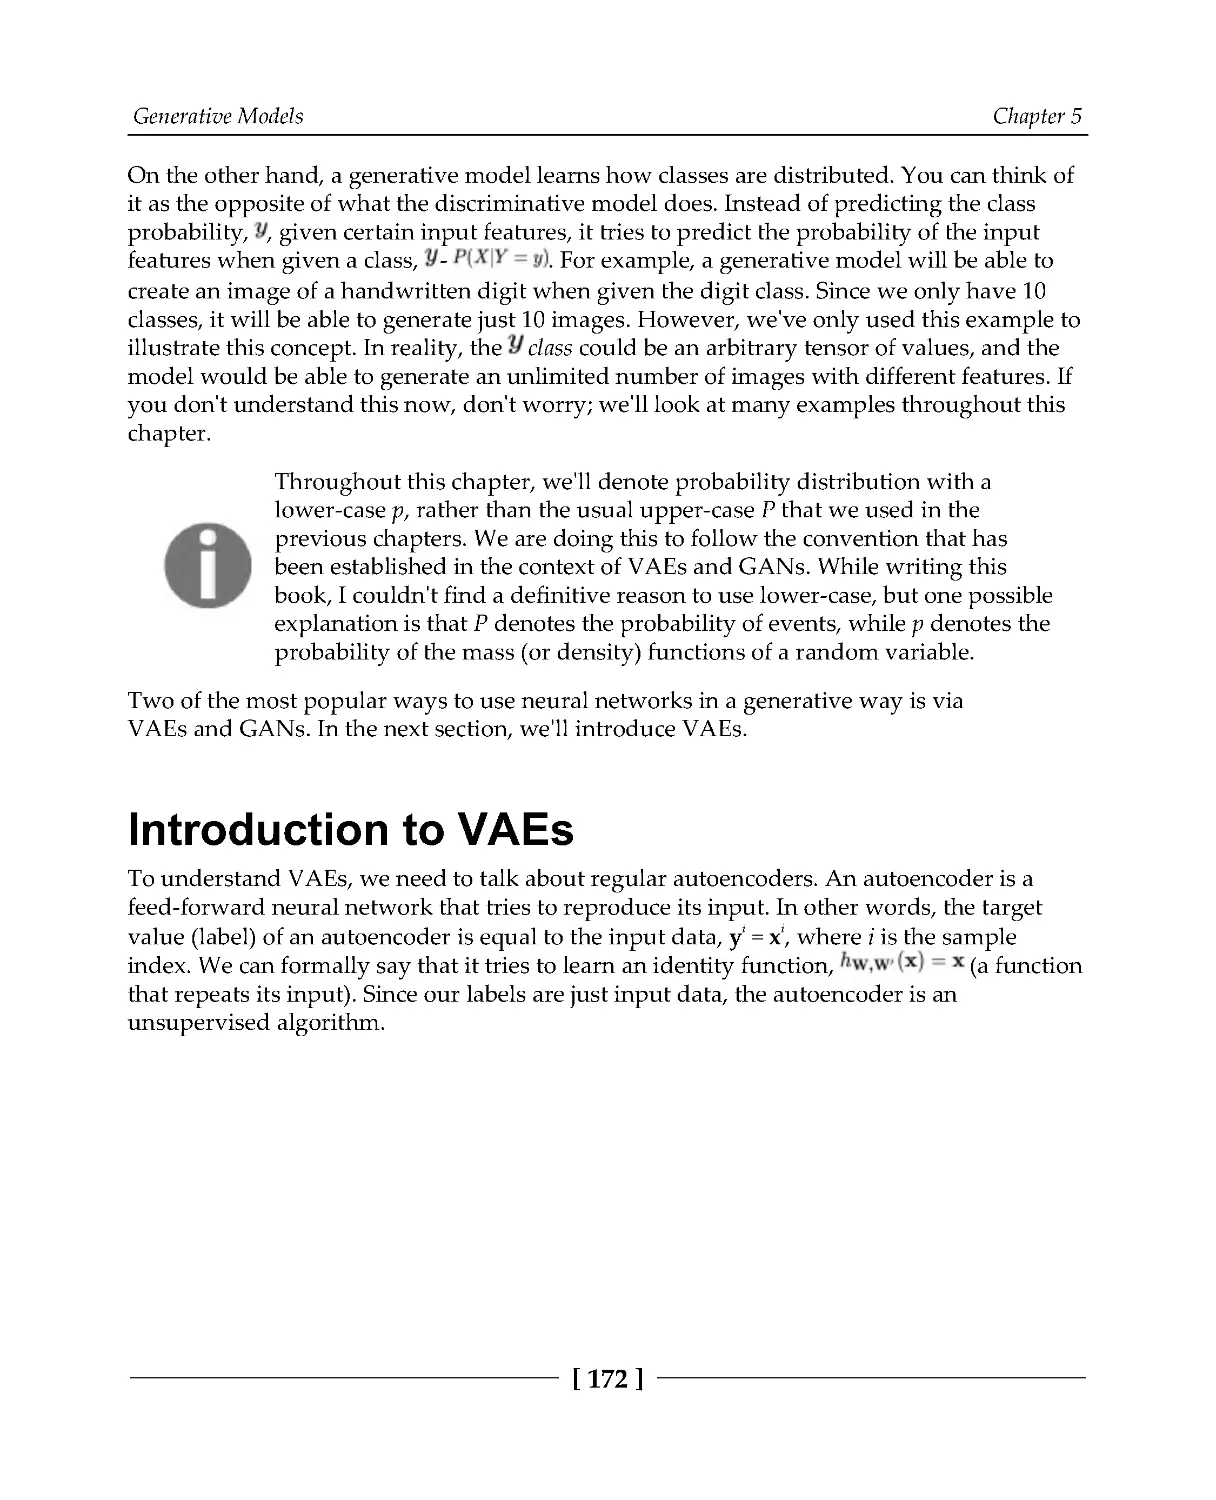 Introduction to VAEs